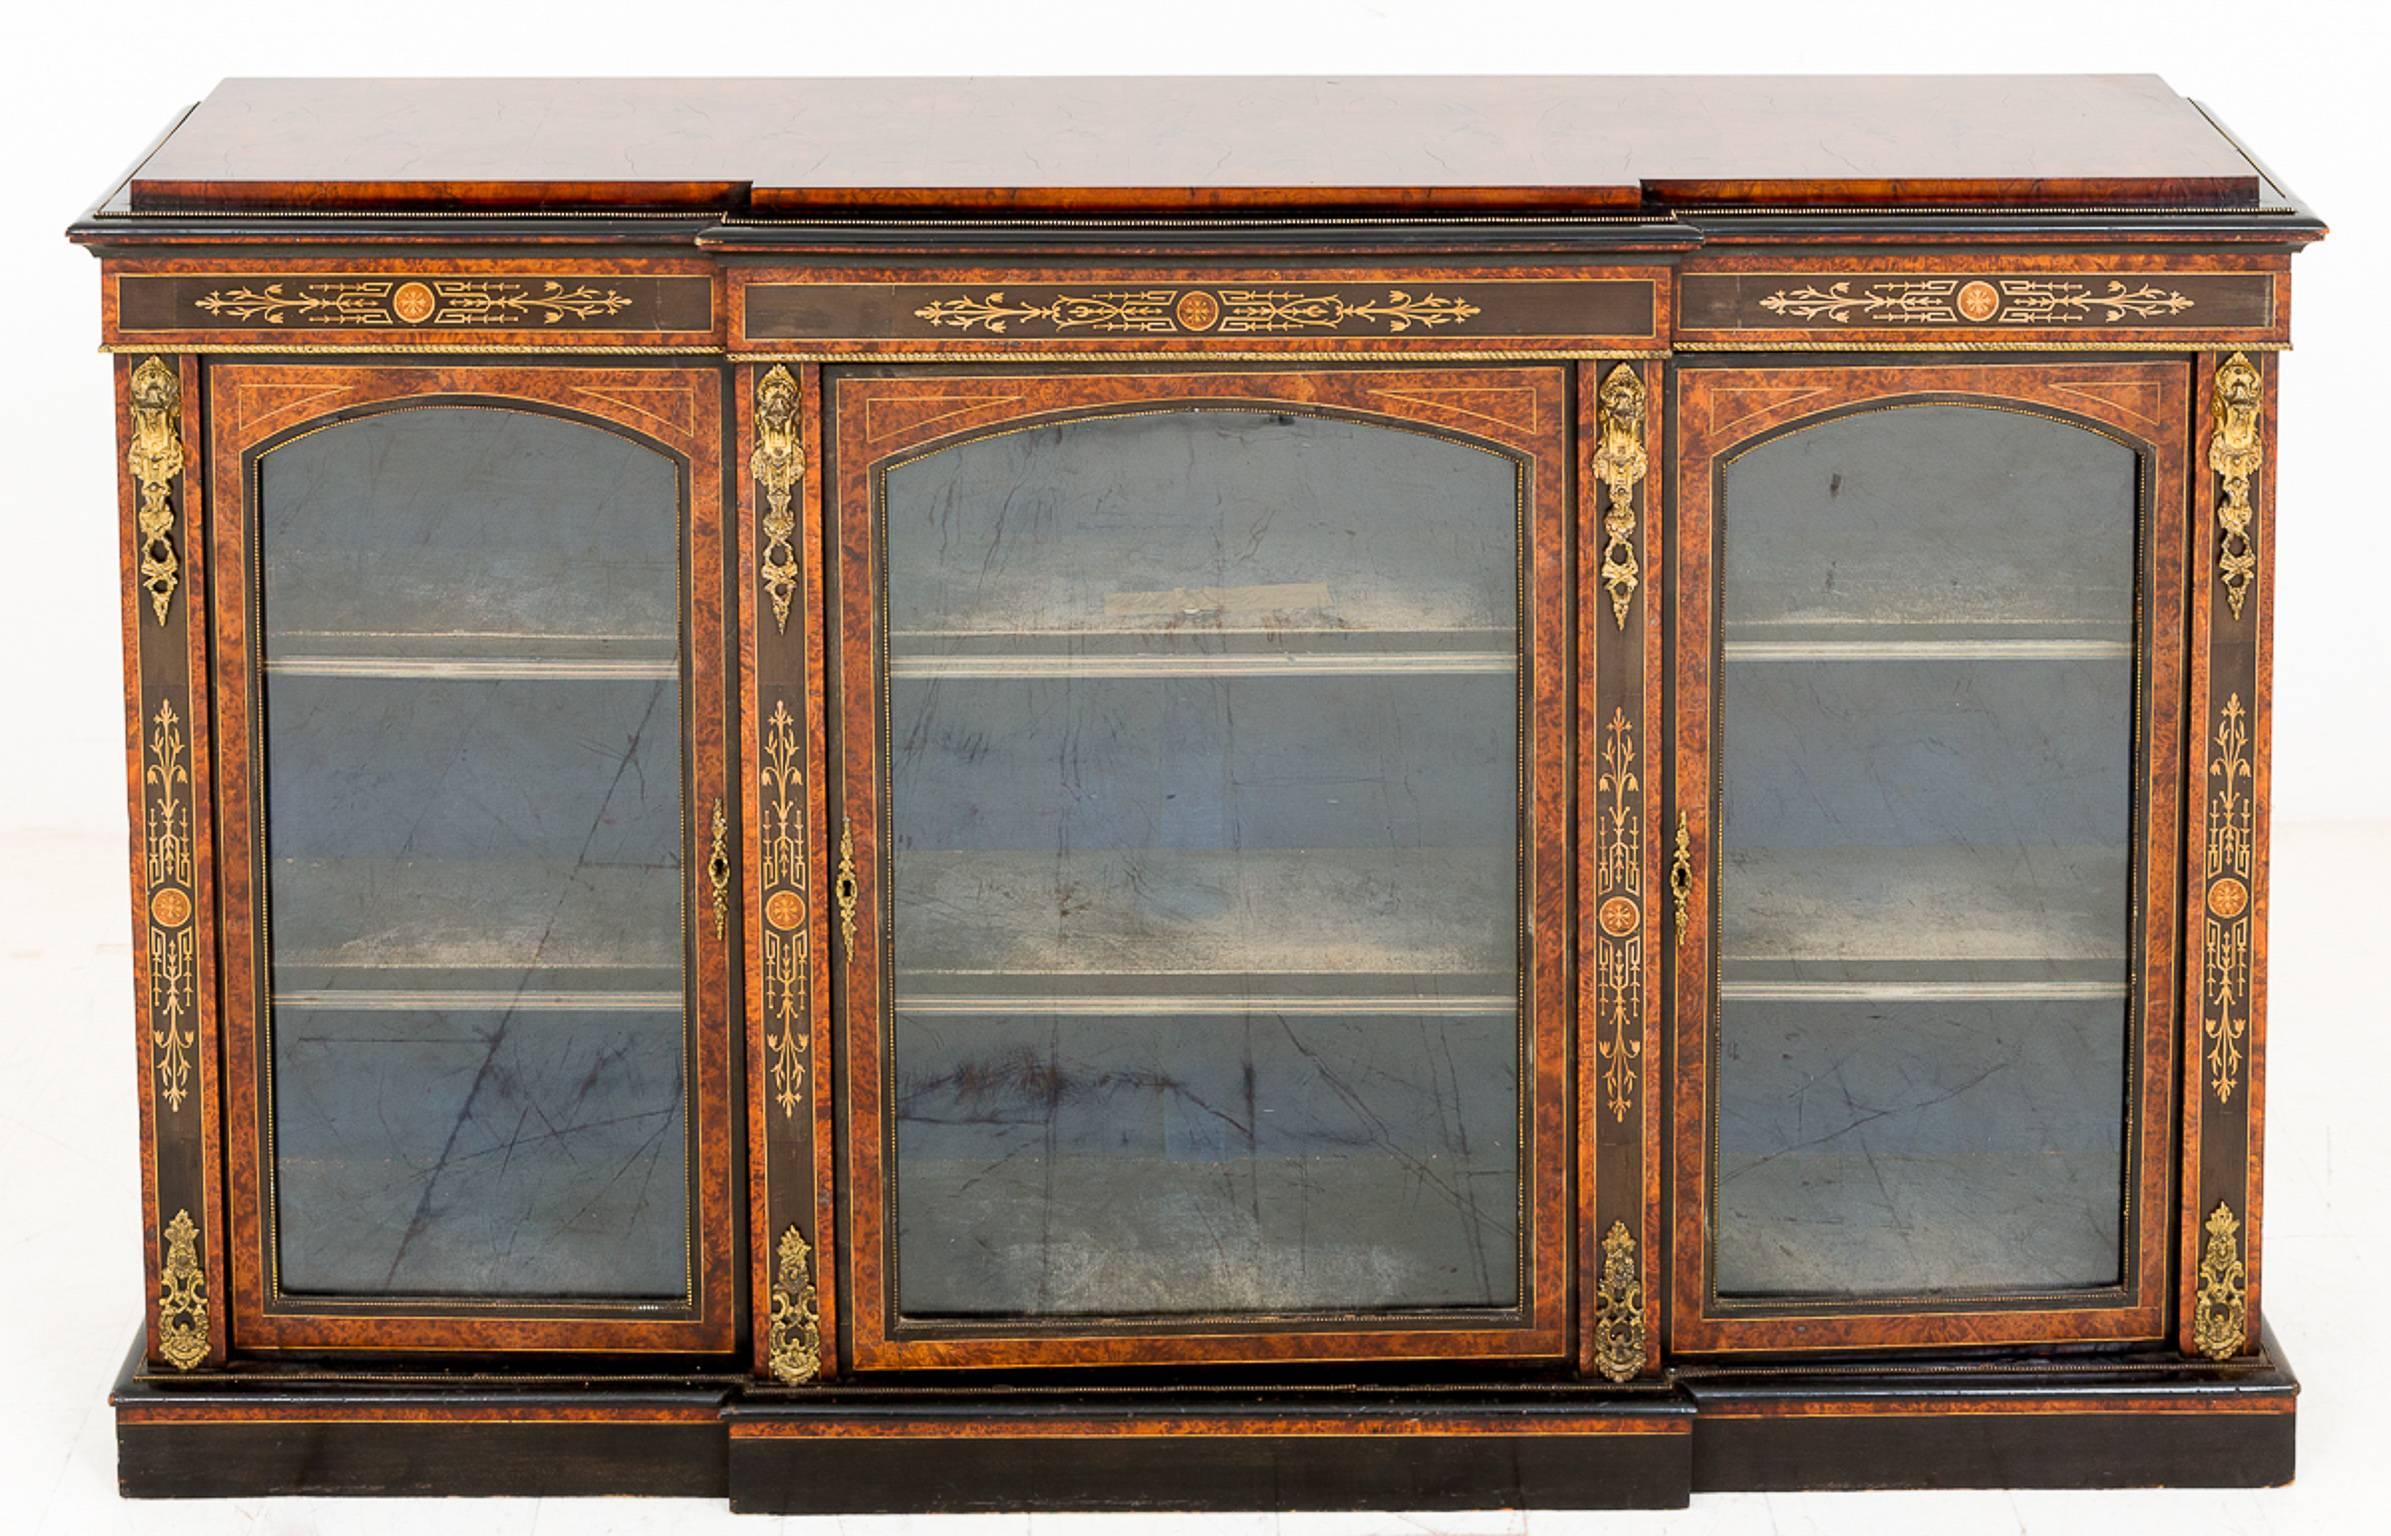 A beautiful three-door breakfront cabinet.
Having stunning burr walnut veneers and gilt metal mounts and mouldings.
The ebony panels featuring marquetry inlays and the interior shelves with the original velor.

Size:
Height 37